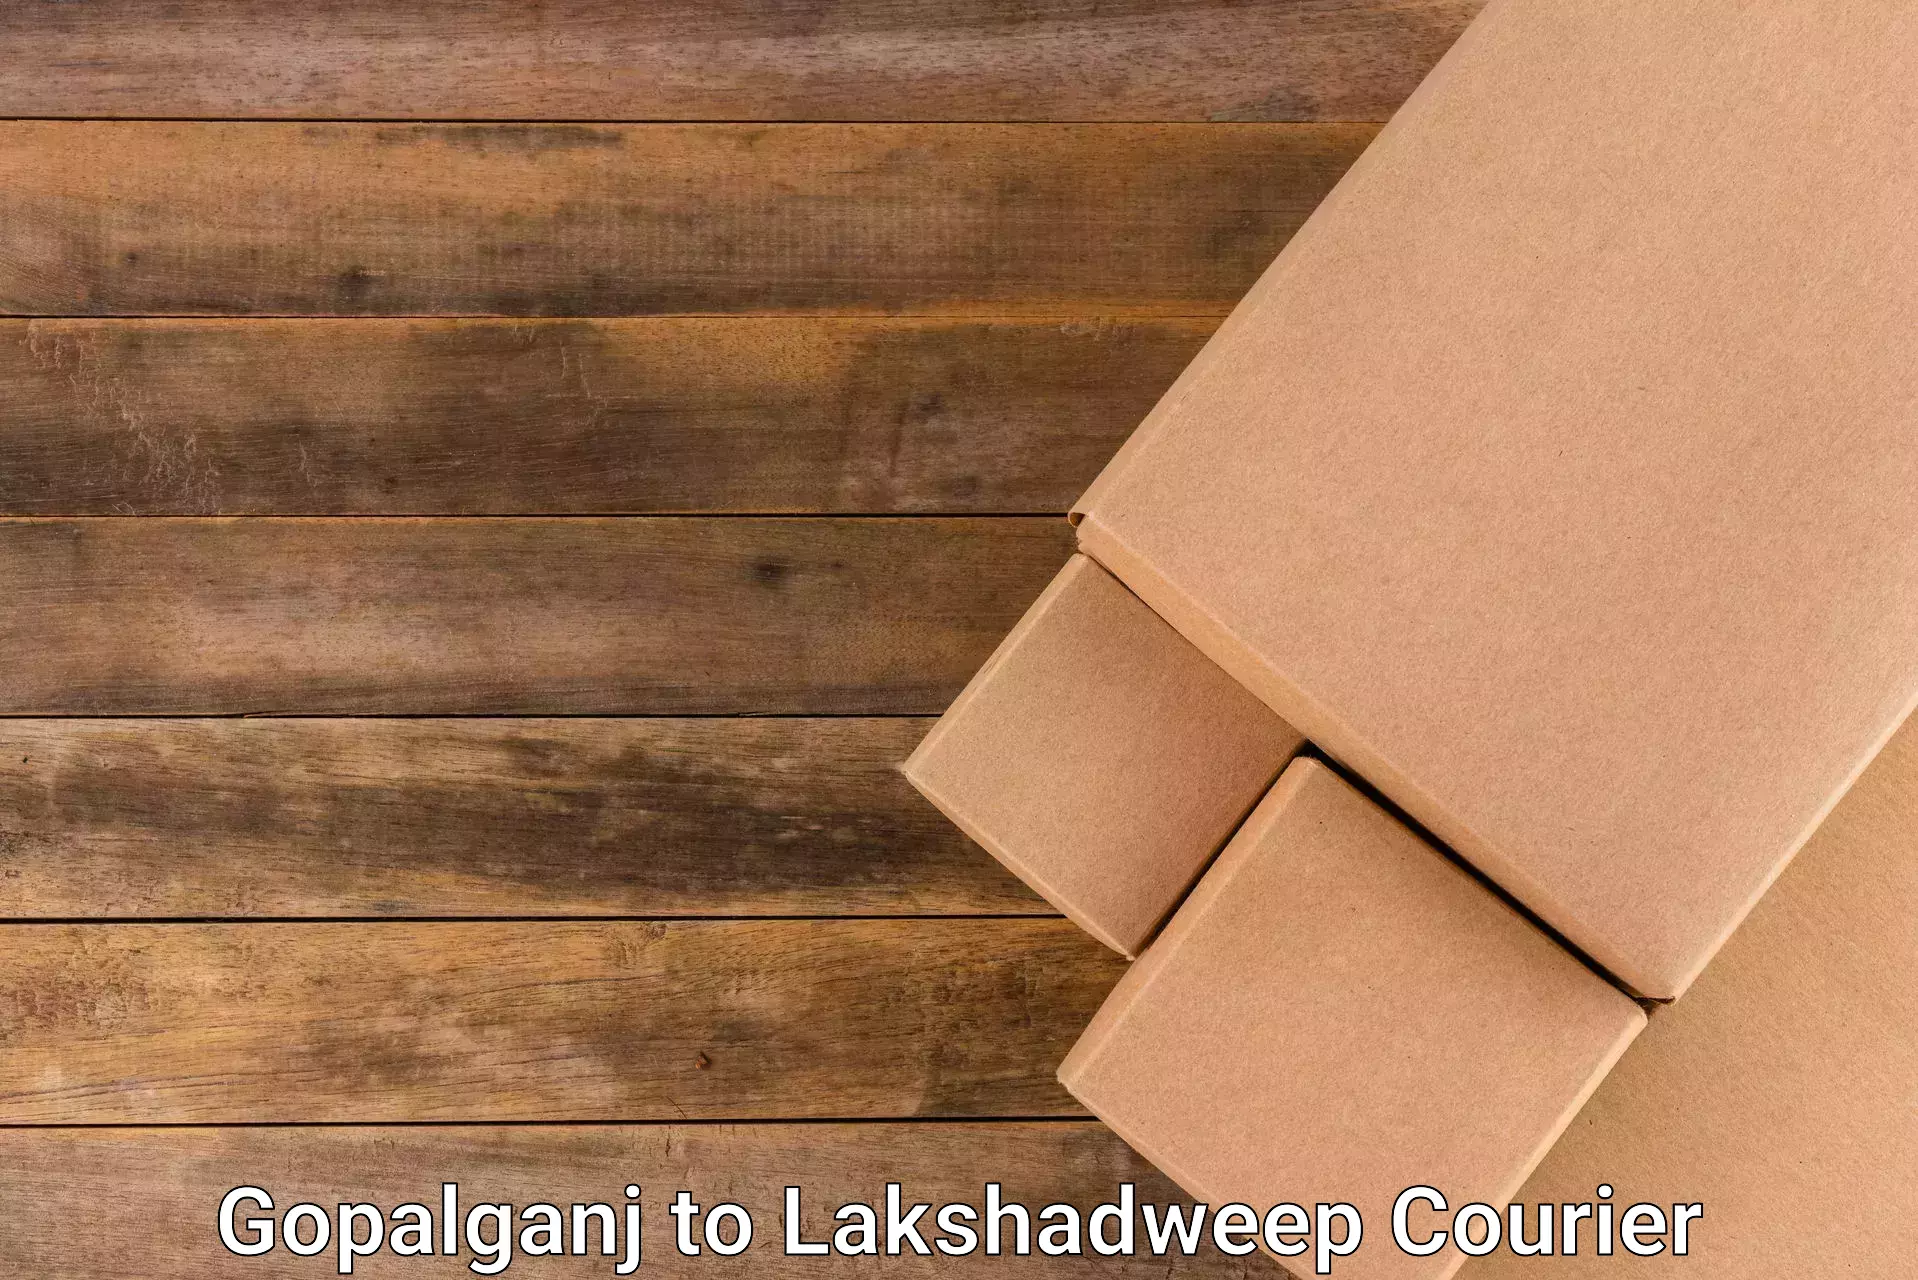 User-friendly delivery service in Gopalganj to Lakshadweep